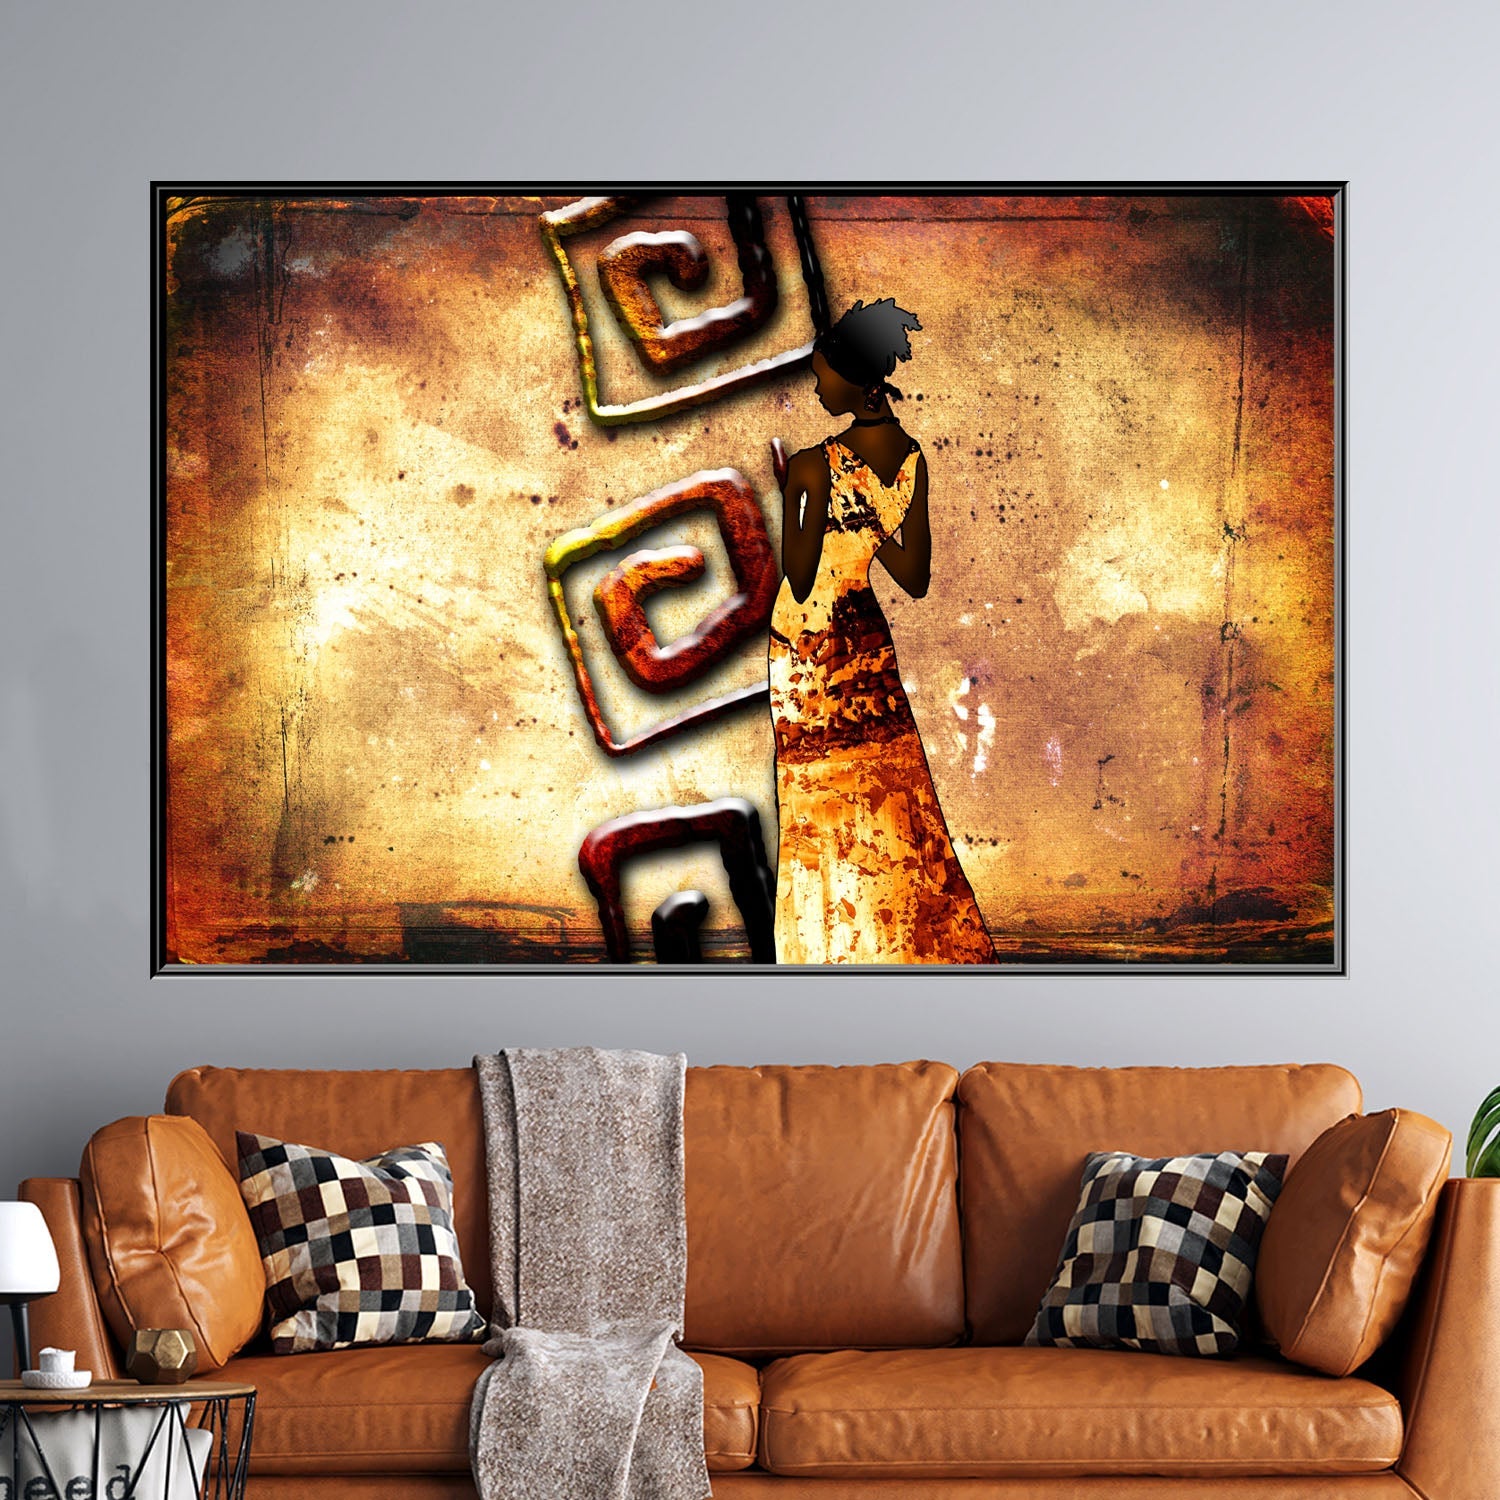 https://cdn.shopify.com/s/files/1/0387/9986/8044/products/SolitudeCanvasArtPrintStretched-1.jpg